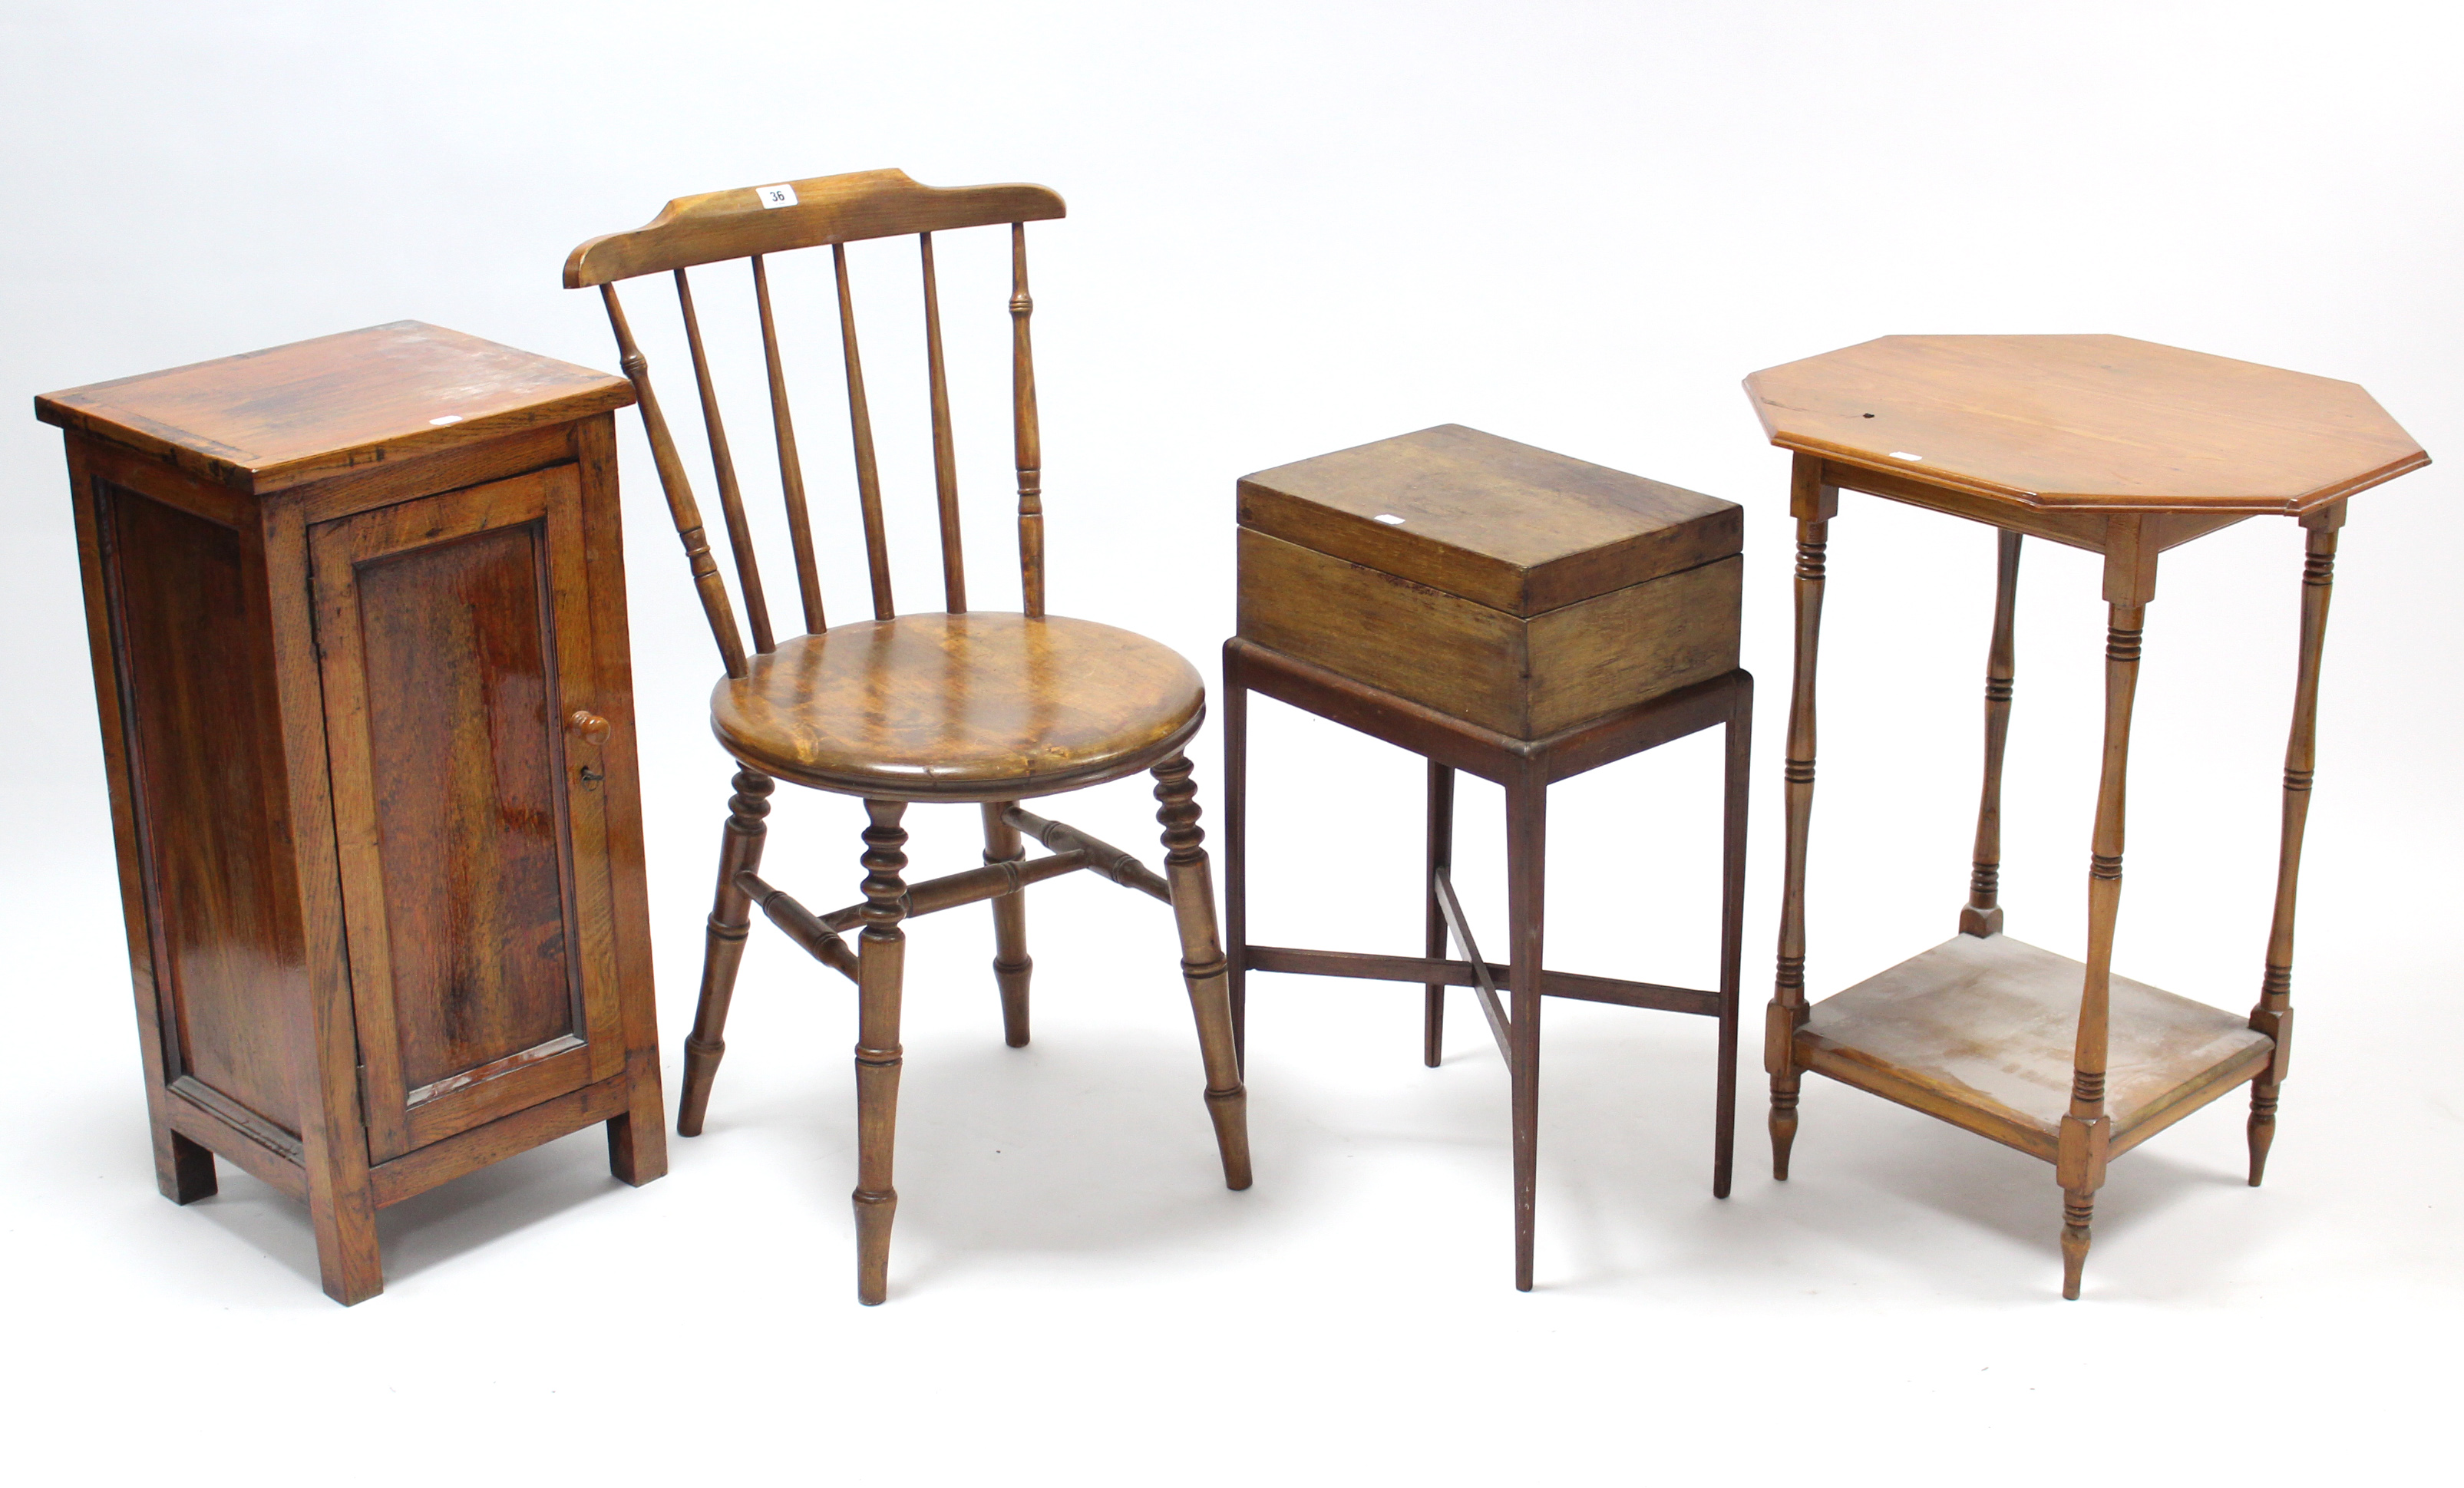 A spindle-back kitchen chair with circular hard seat, & on turned legs with spindle stretchers;